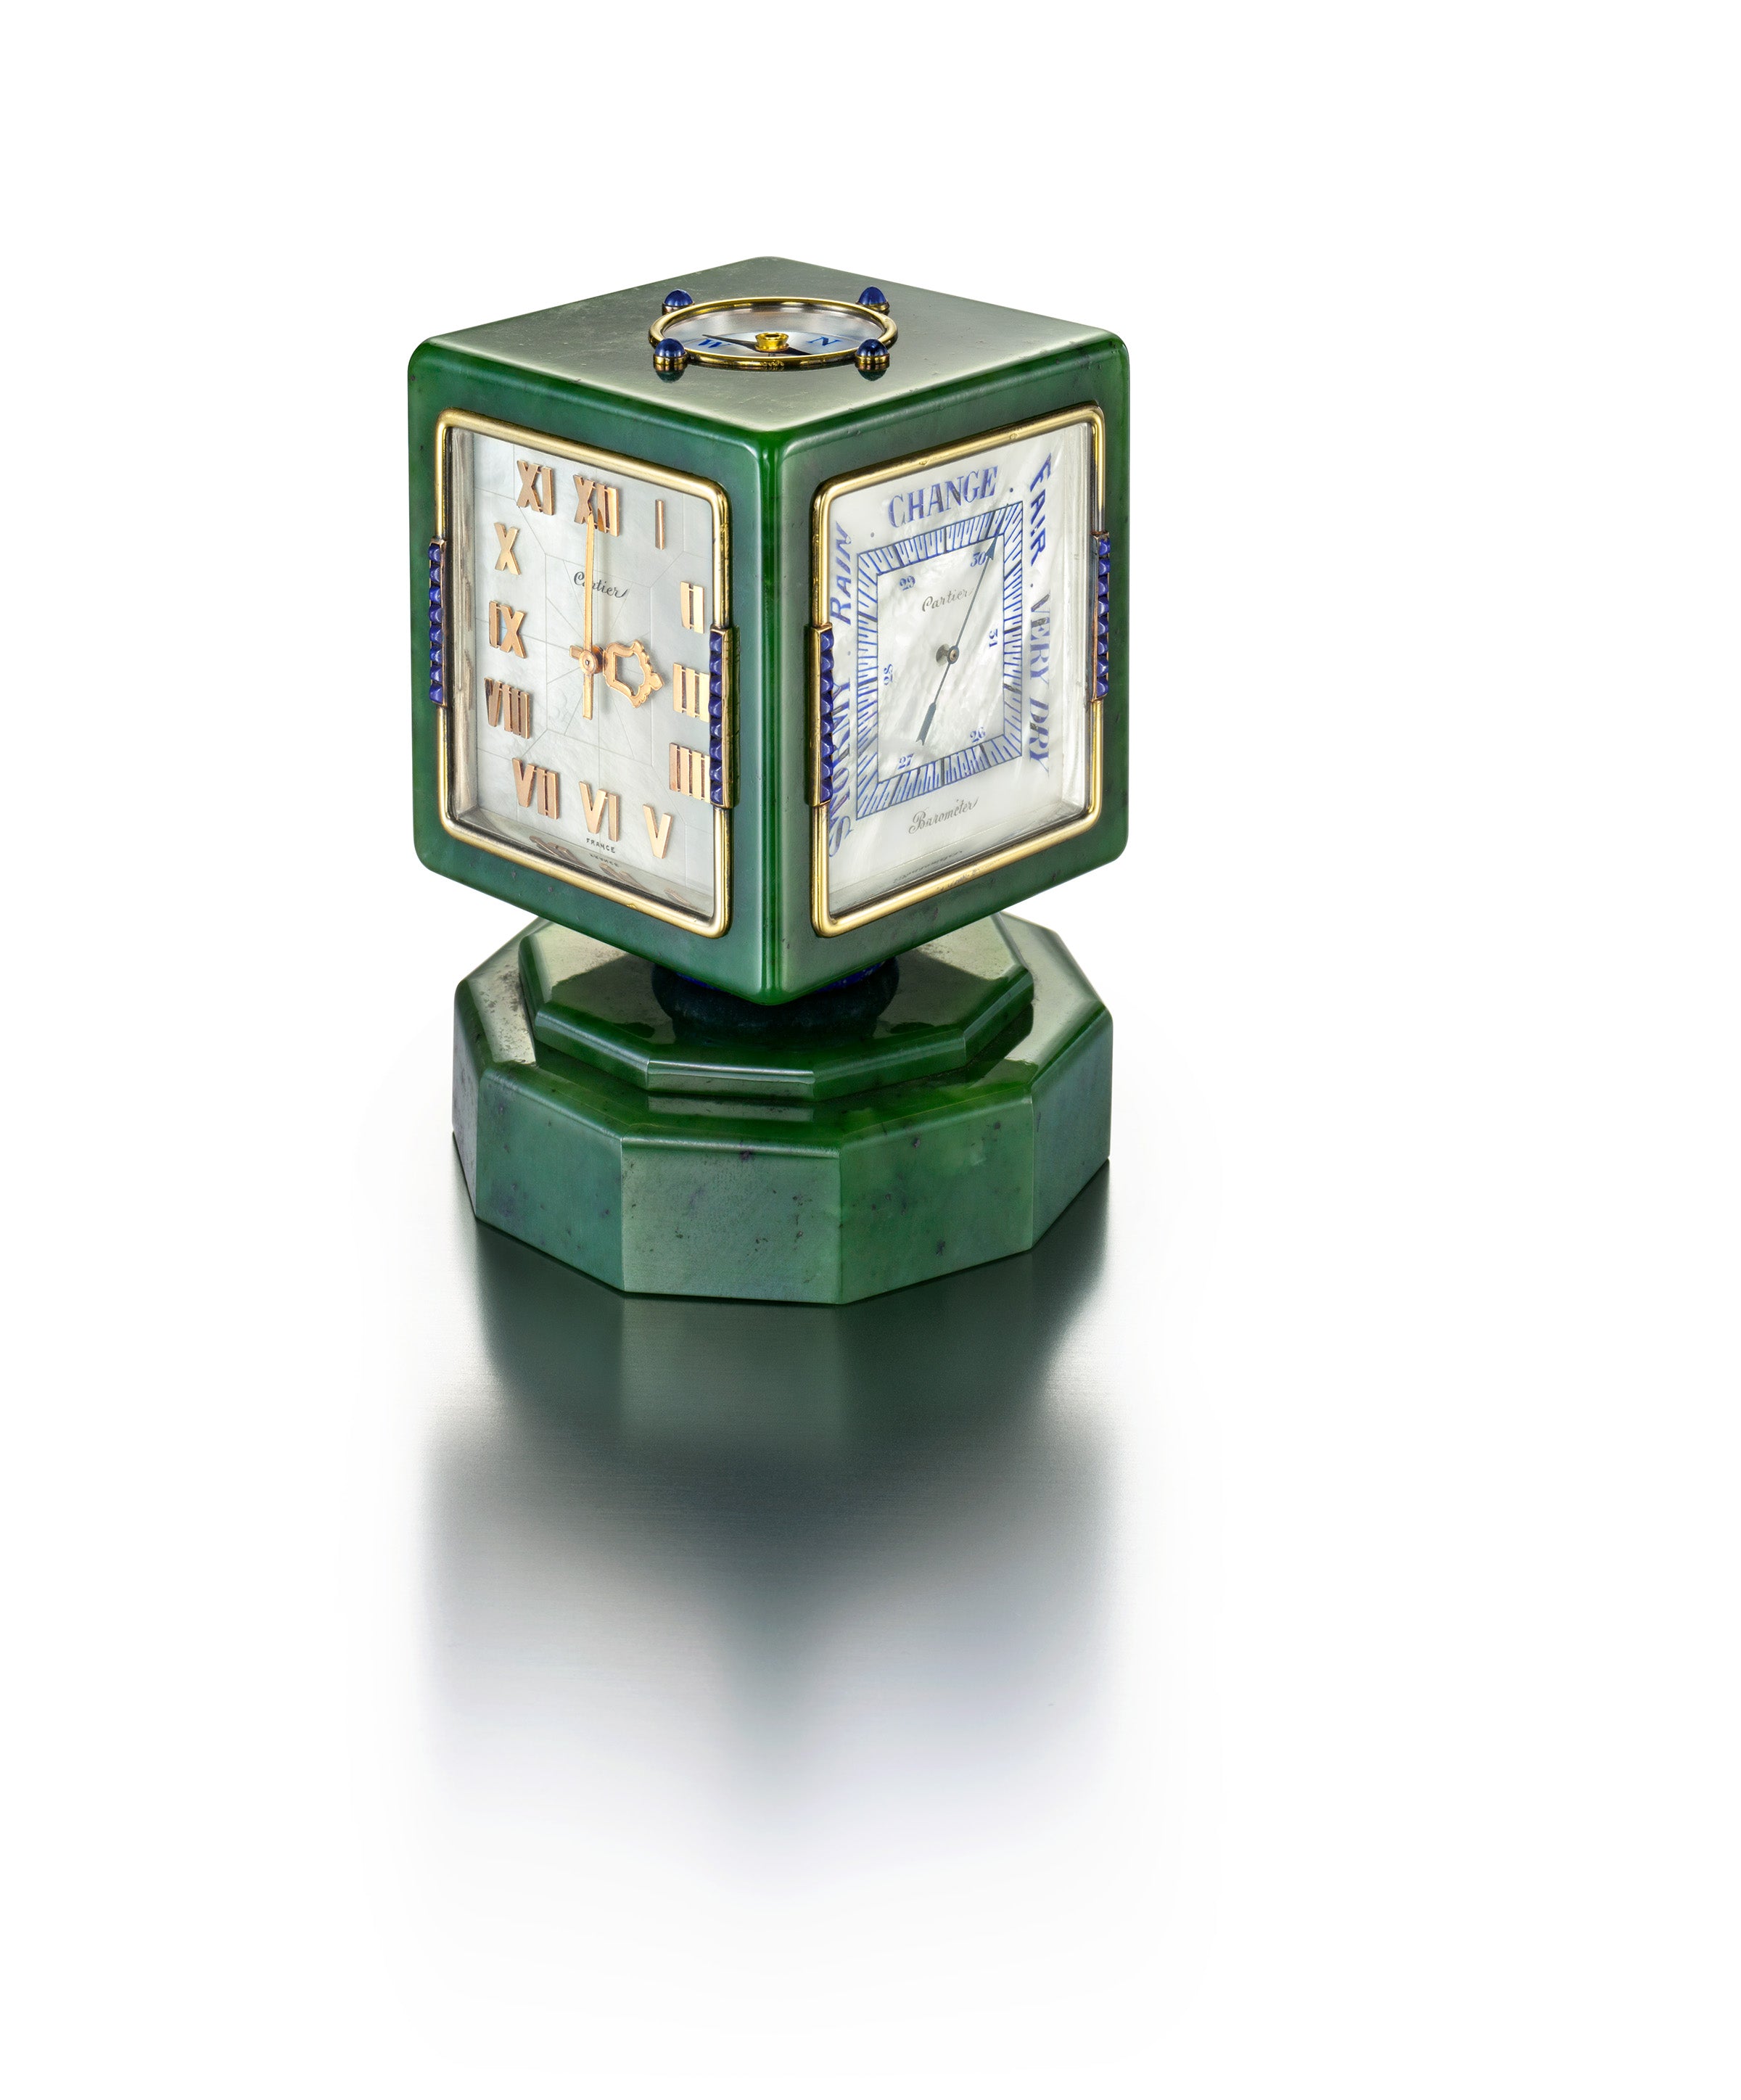 ART  DECO  NEPHRITE  JADE,  SAPPHIRE,  AND  MOTHER-OF-PEARL  REVOLVING  DESK  CLOCK WITH  CALENDAR,  BAROMETER,  THERMOMETER,  AND  COMPASS  BY  CARTIER,  CIRCA  1930